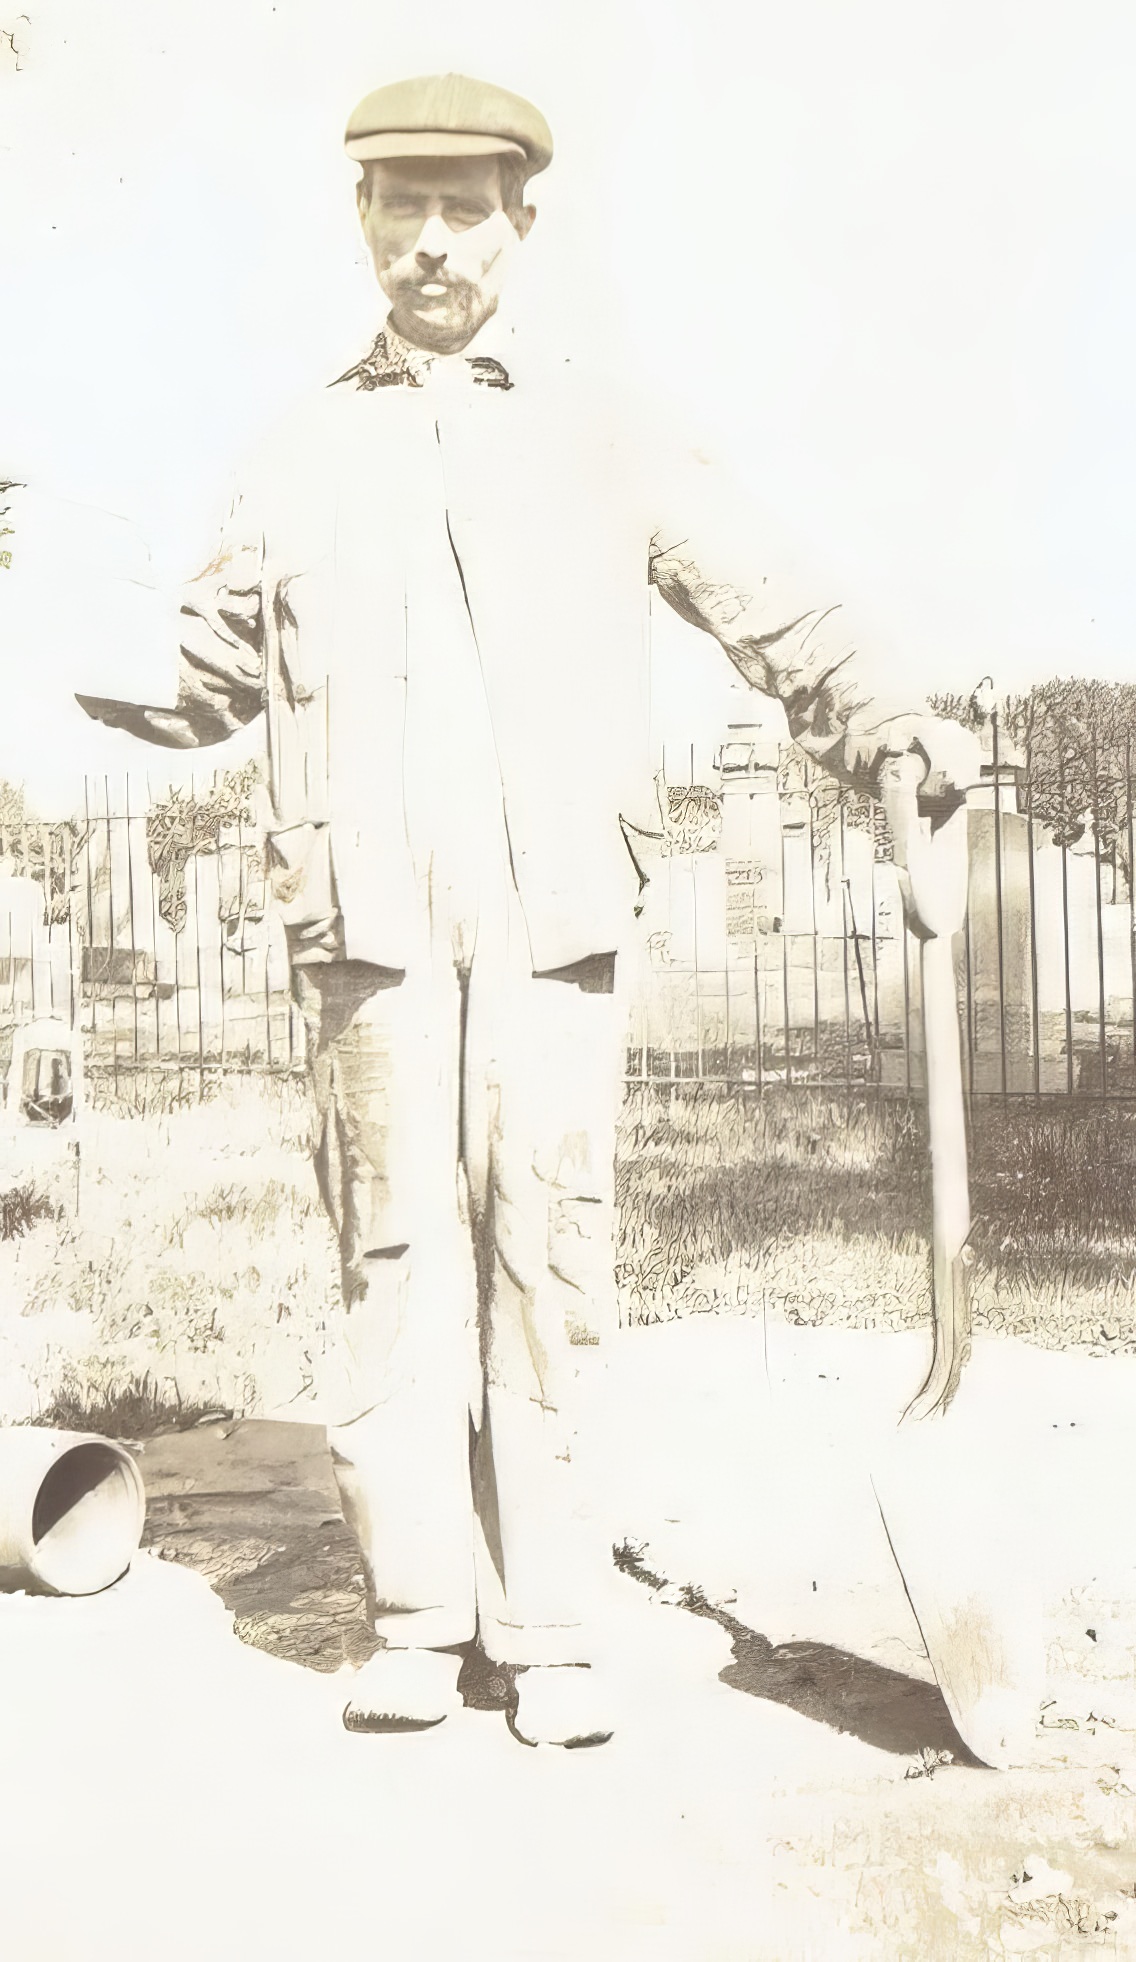 Mike Mozzona, a participant in the Liberty Bond campaign to support the Allies in World War I, standing near St. Patrick's Cemetery, Geneva, circa 1917